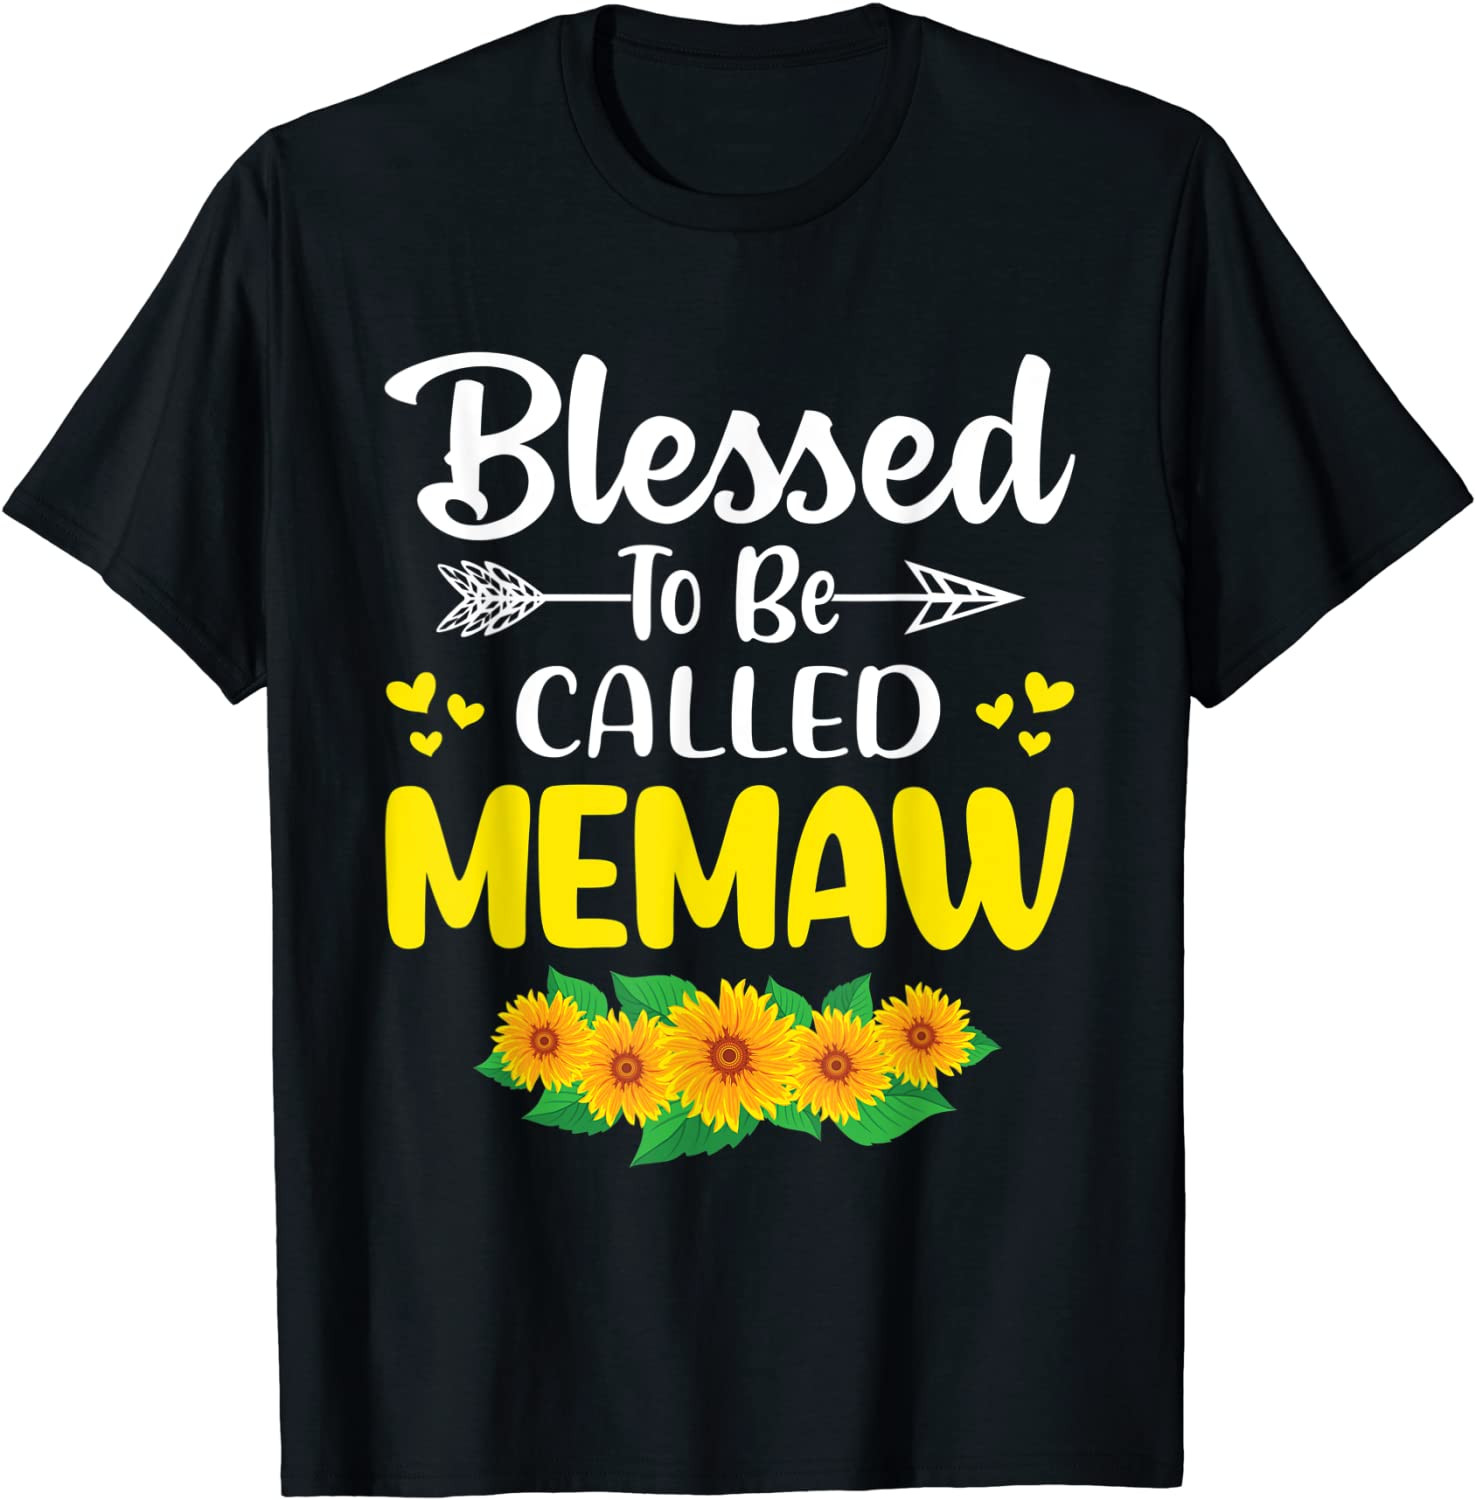 Blessed To Be Called Memaw Sunflowers Thanksgiving Christmas T-Shirt